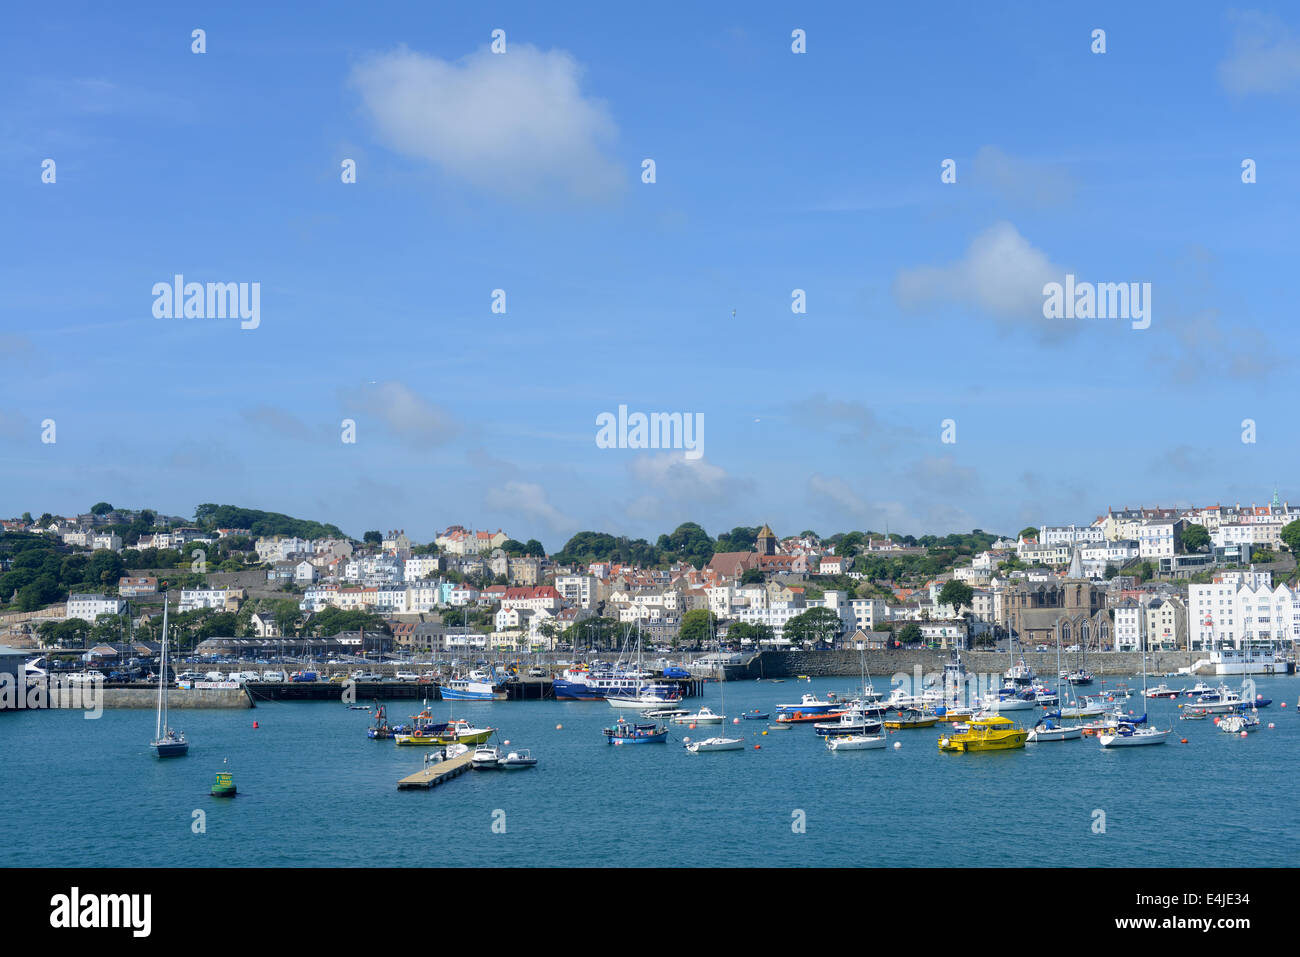 St Peter Port, Guernsey, Channel Islands Stock Photo